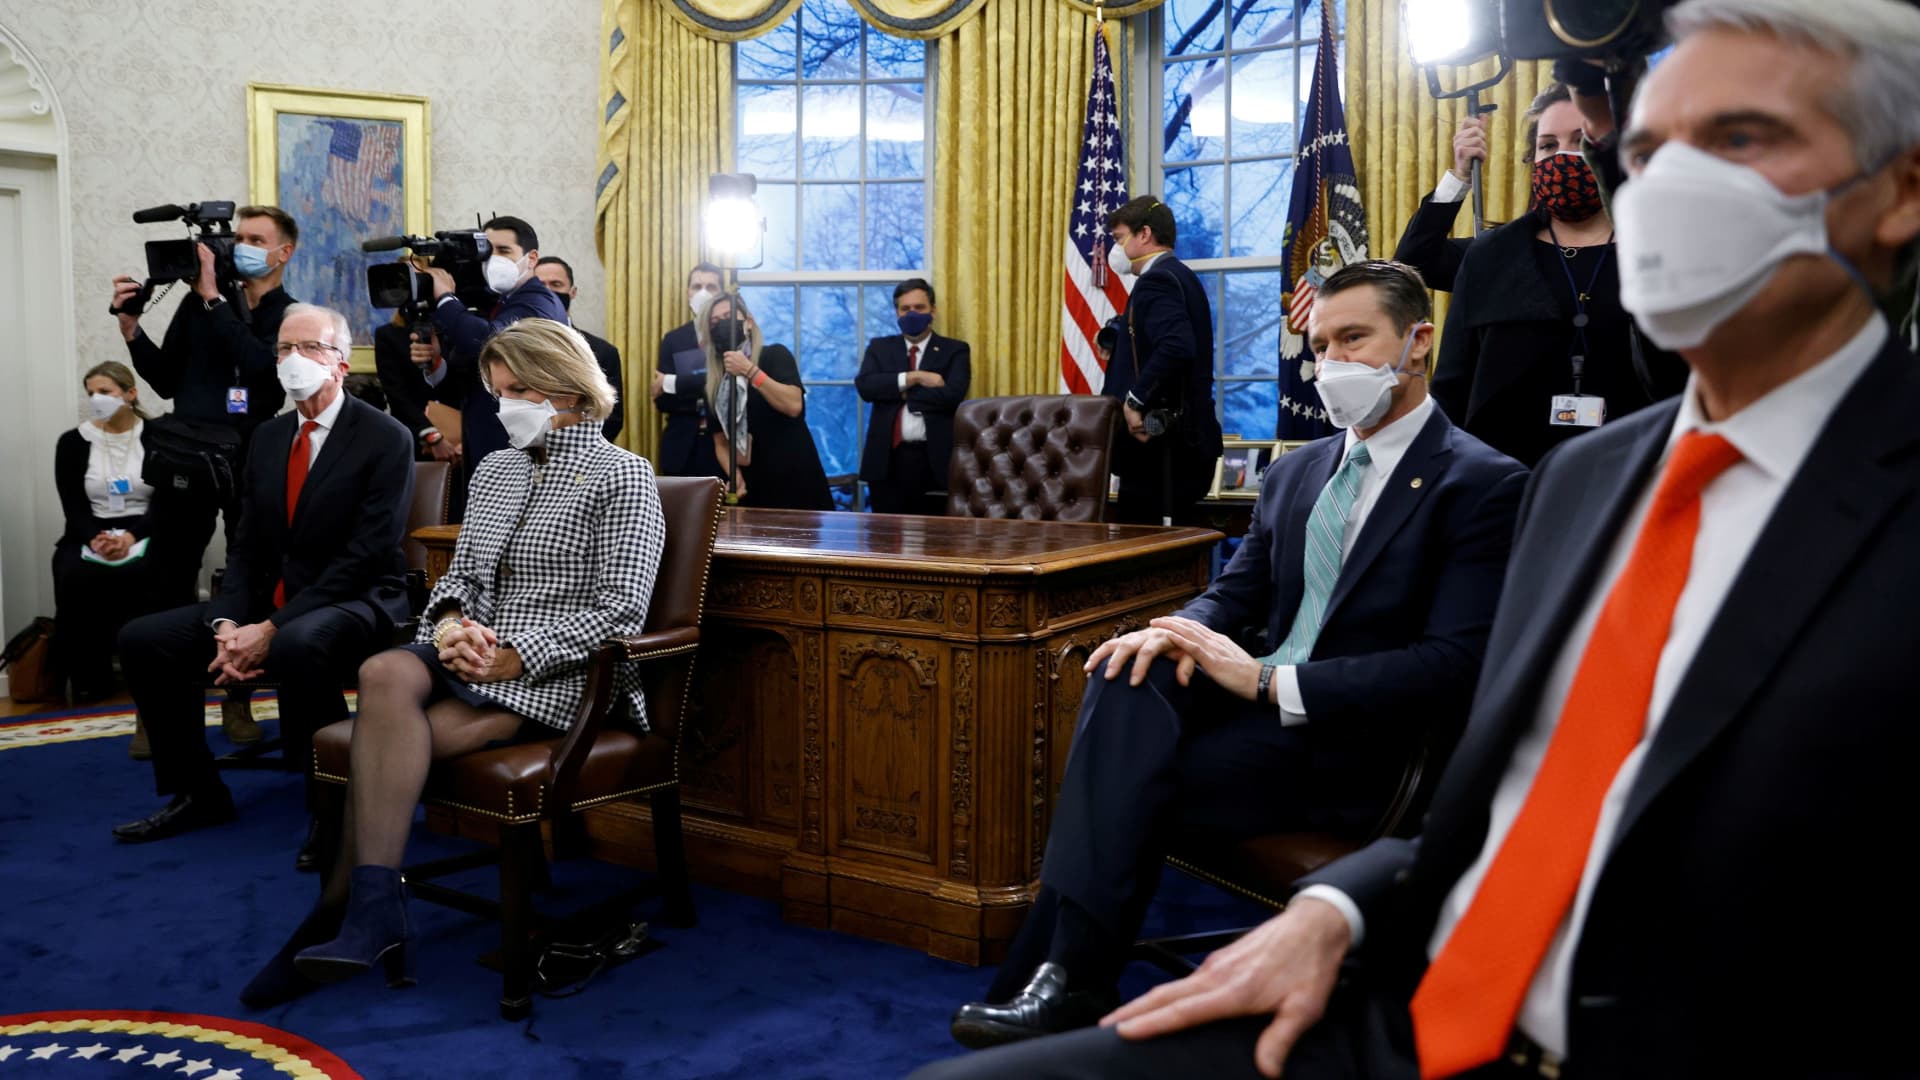 Republican senators look on during a meeting with U.S. President Joe Biden and Vice President Kamala Harris, not pictured, to discuss coronavirus disease (COVID-19) federal aid legislation inside the Oval Office at the White House in Washington, U.S., February 1, 2021.